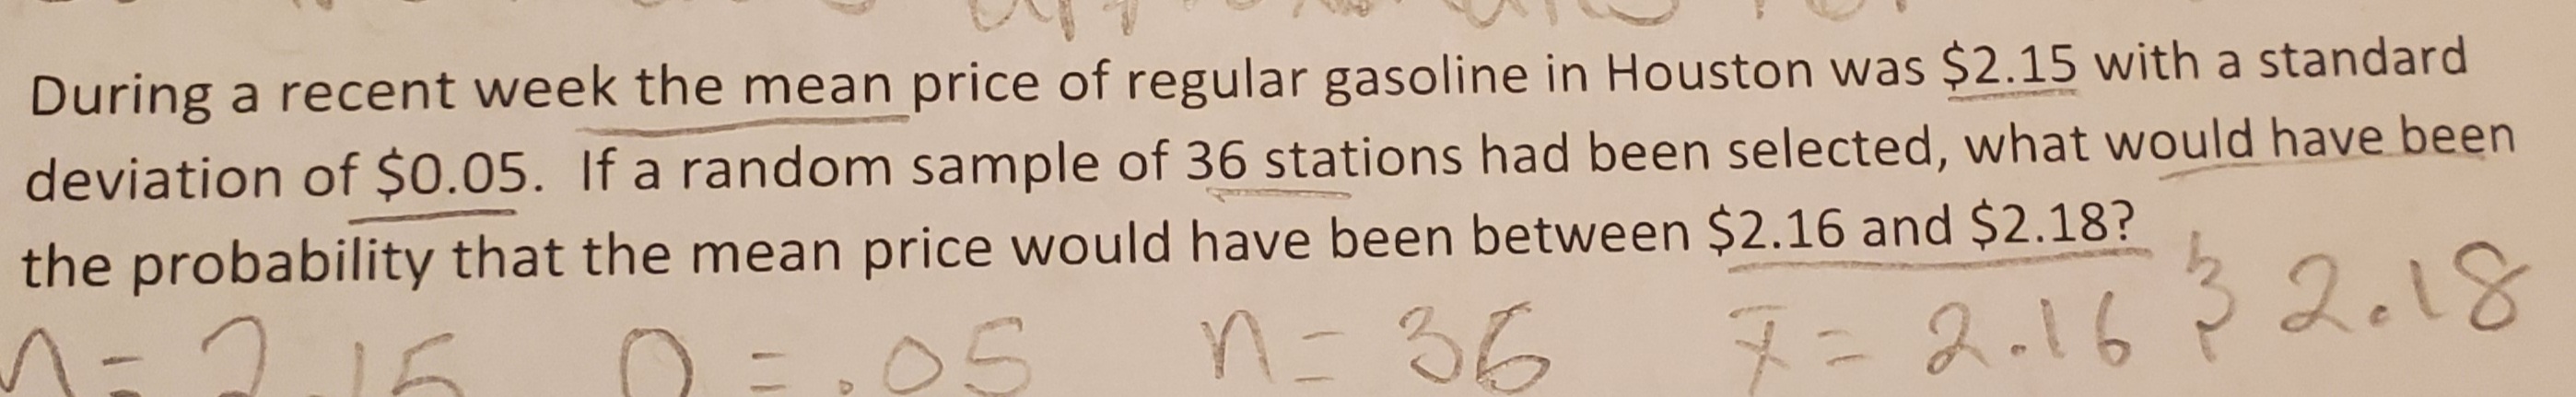 During a recent week the mean price of regular gasoline in Houston was $2.15 with a standard
deviation of $0.05. If a random sample of 36 stations had been selected, what would have been
the probability that the mean price would have been between $2.16 and $2.18?
adiamne
7=2.1632.18
